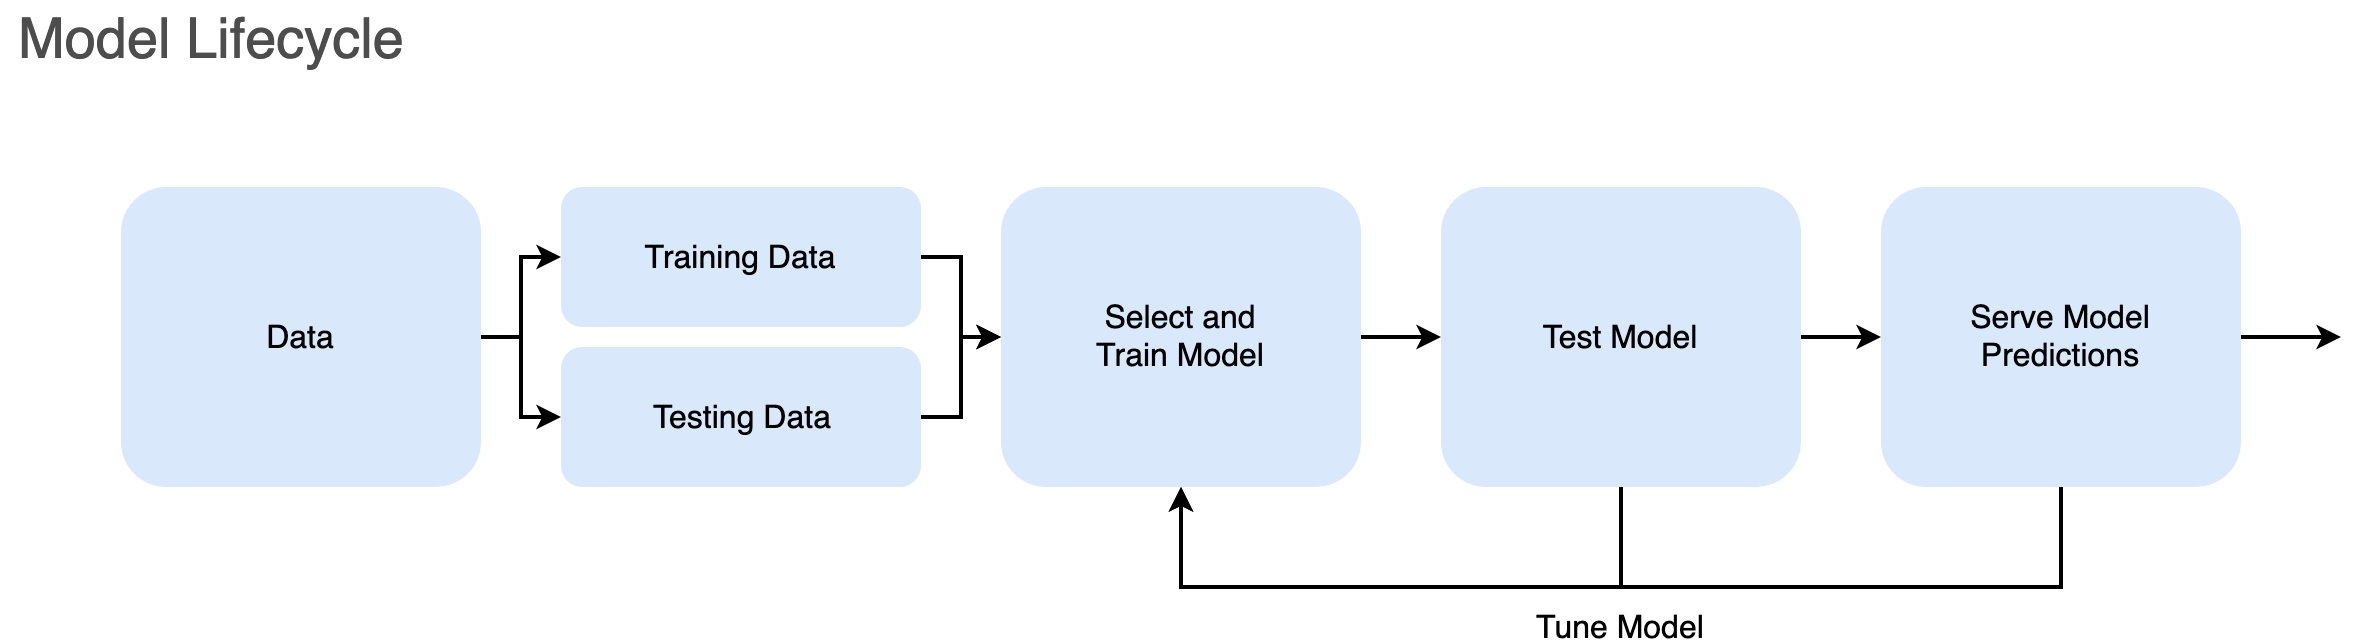 Flowchart diagram of the lifecycle of a model. Data is trained and tested. Then the model is served and tuned.